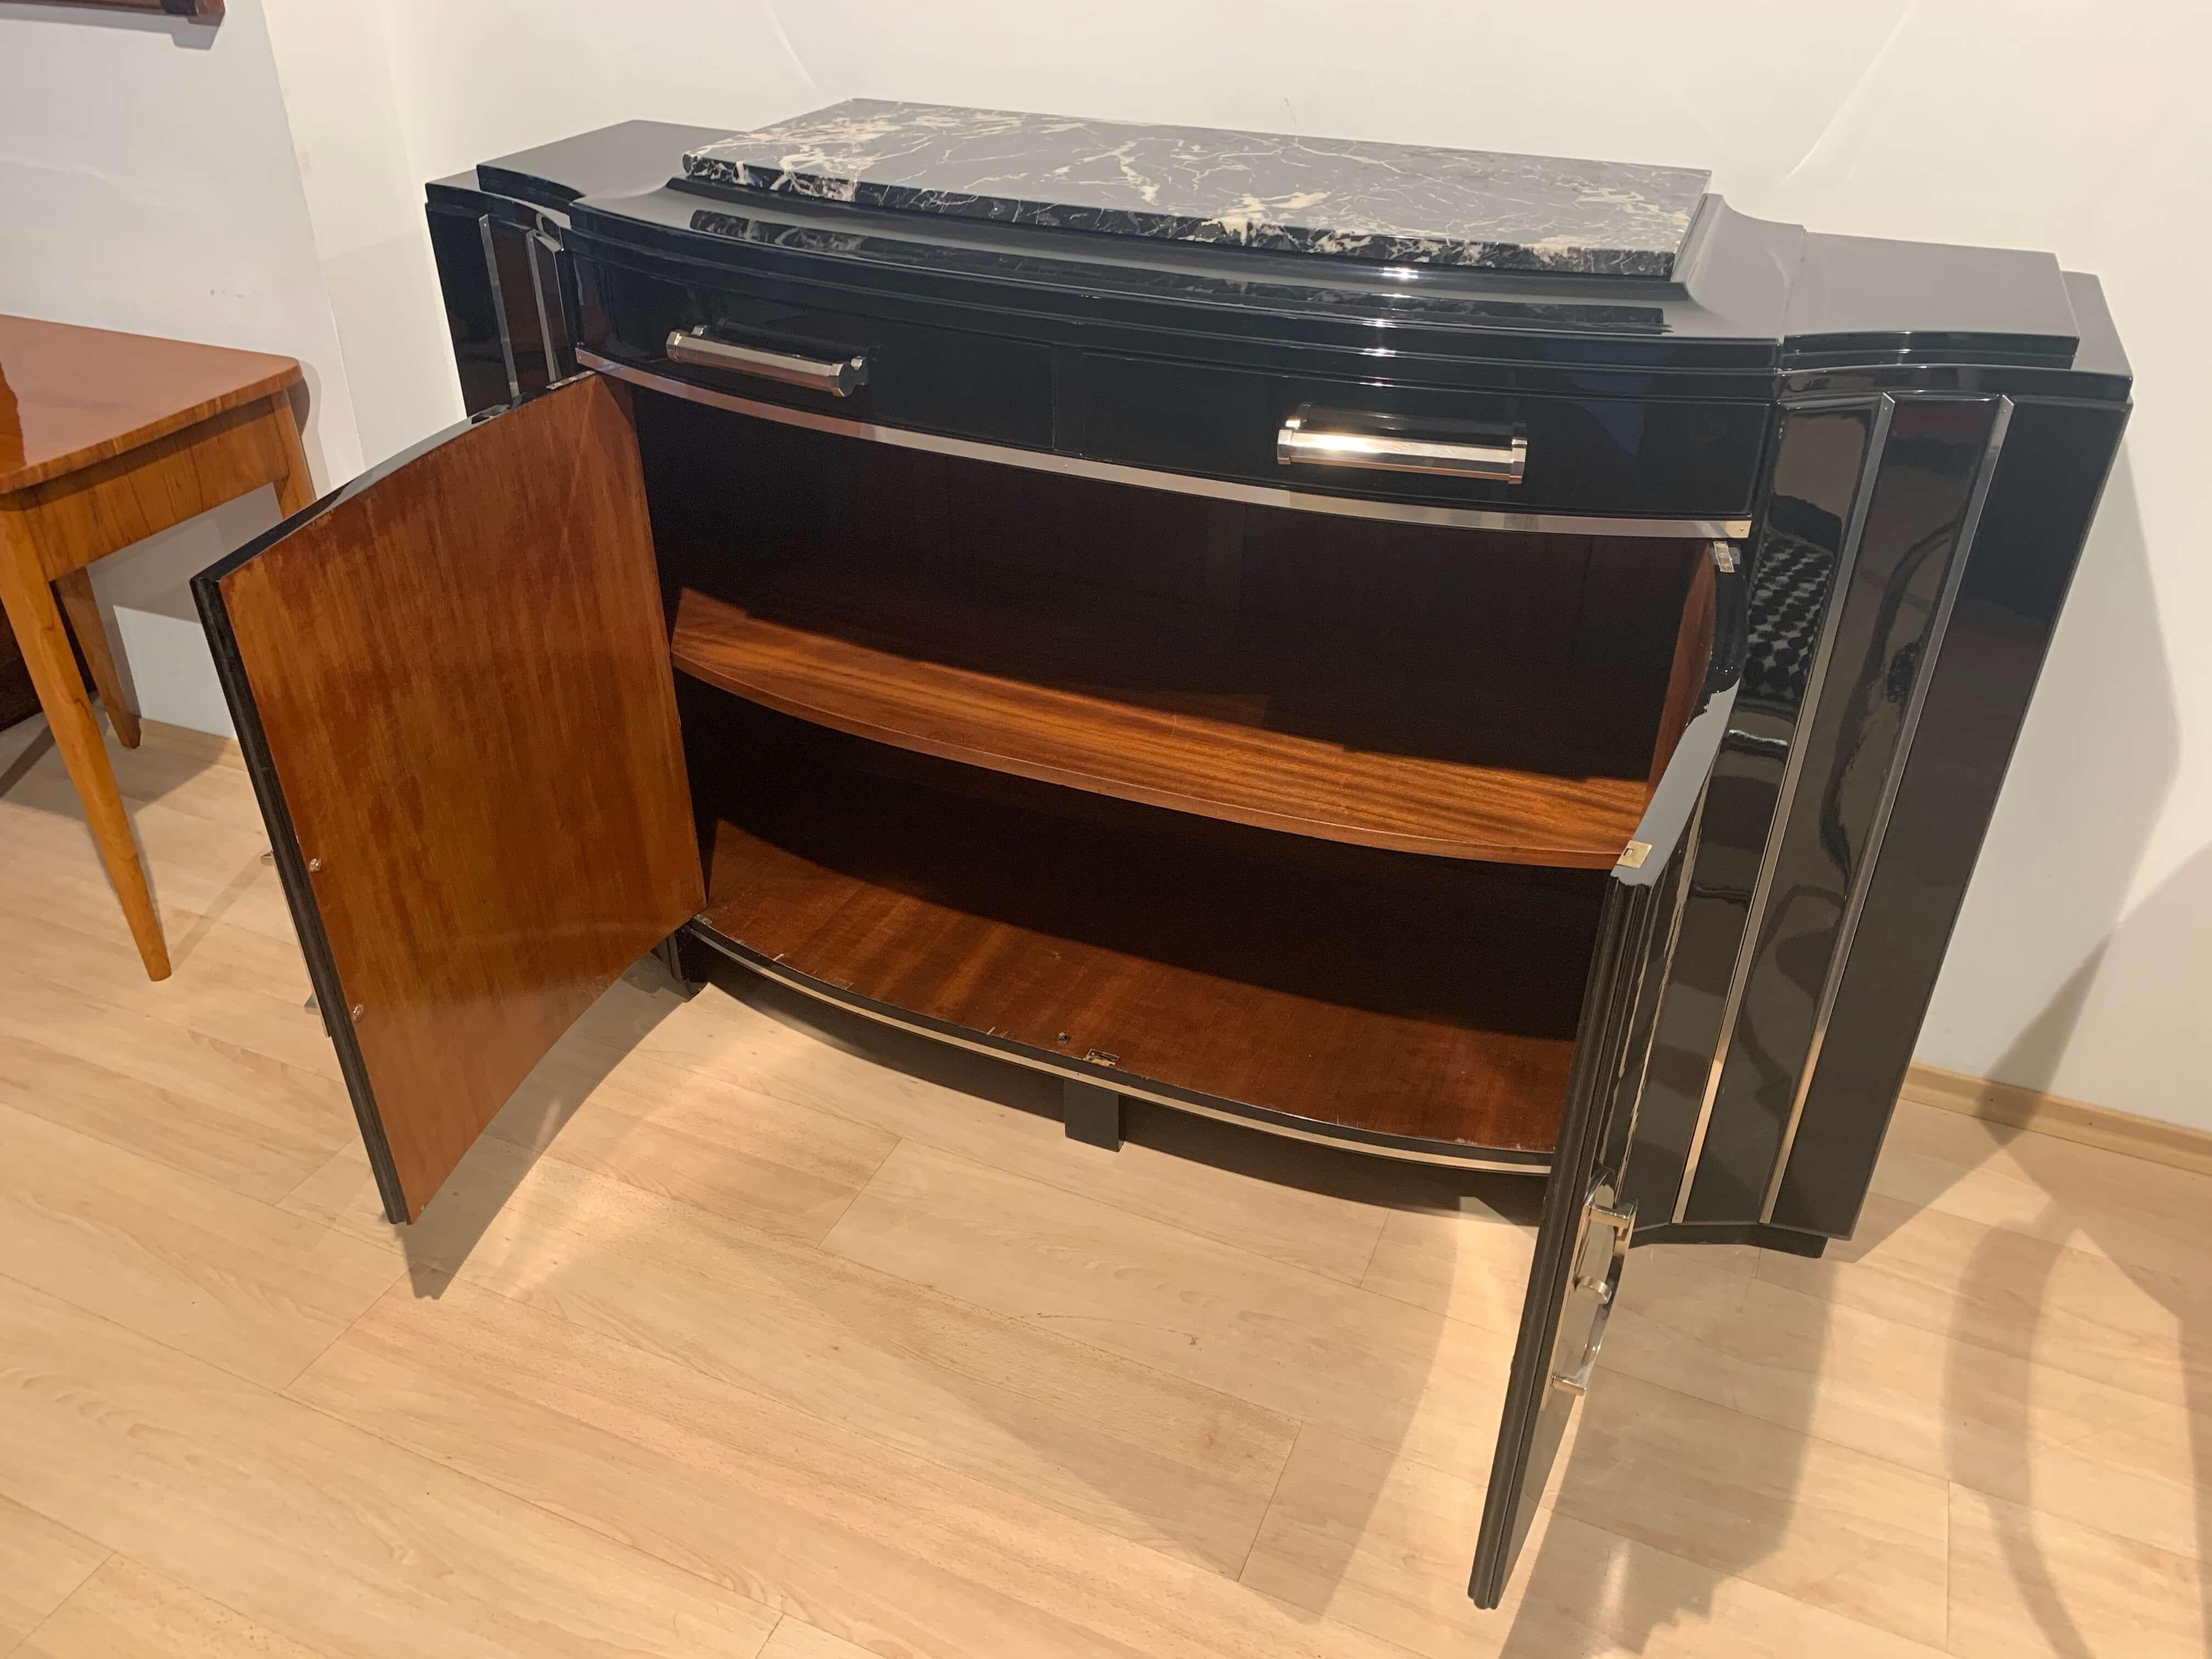 Art Deco Sideboard, Curved Front, Black, Mahogany and Chrome, France, circa 1930 (Poliert)